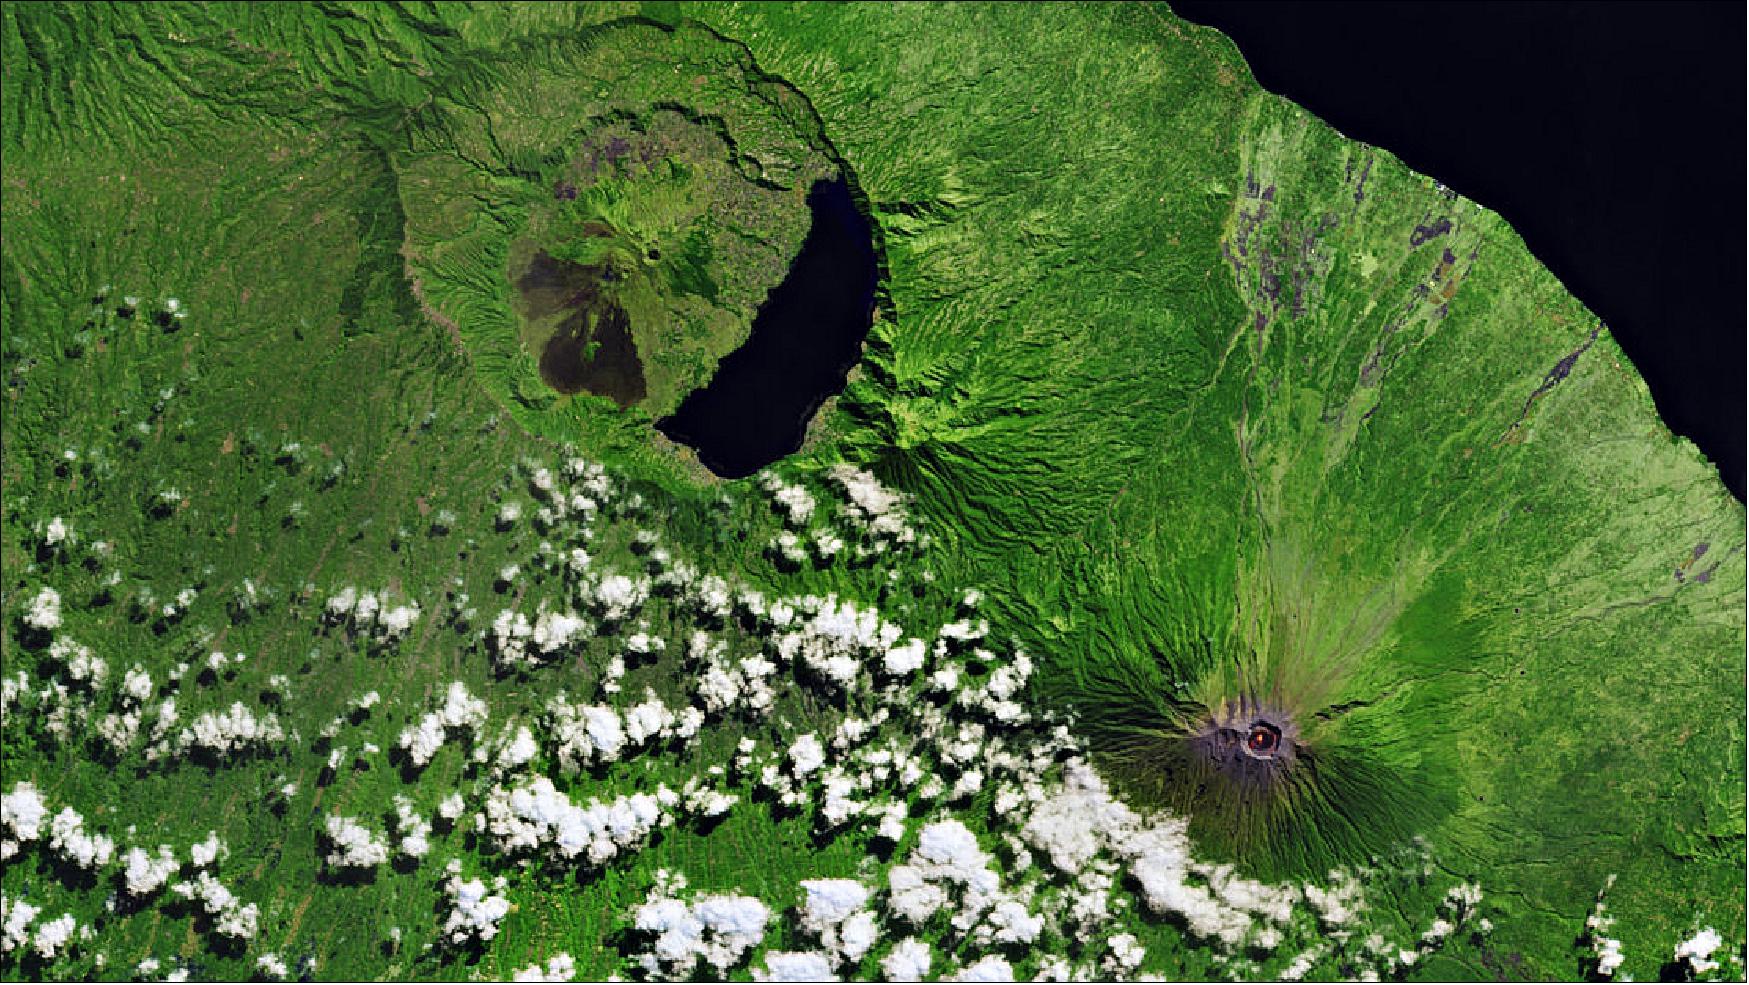 Figure 34: This image of Mount Agung on the Indonesian island of Bali was captured on 2 July 2018 by the Copernicus Sentinel-2 mission (the image was released on 22 February 2019, offering a ‘camera-like’ view of the Agung and Batur volcanoes). After being dormant for 50 years, Mount Agung erupted in November 2017. It has continued to erupt on and off since then – a bright orange spot can be seen in the volcano’s crater. Recent research provides evidence that Agung and the neighboring Batur volcano, visible northwest of Agung, may have a connected magma plumbing system (image credit: ESA, the image contains modified Copernicus Sentinel data (2018), processed by ESA, CC BY-SA 3.0 IGO)